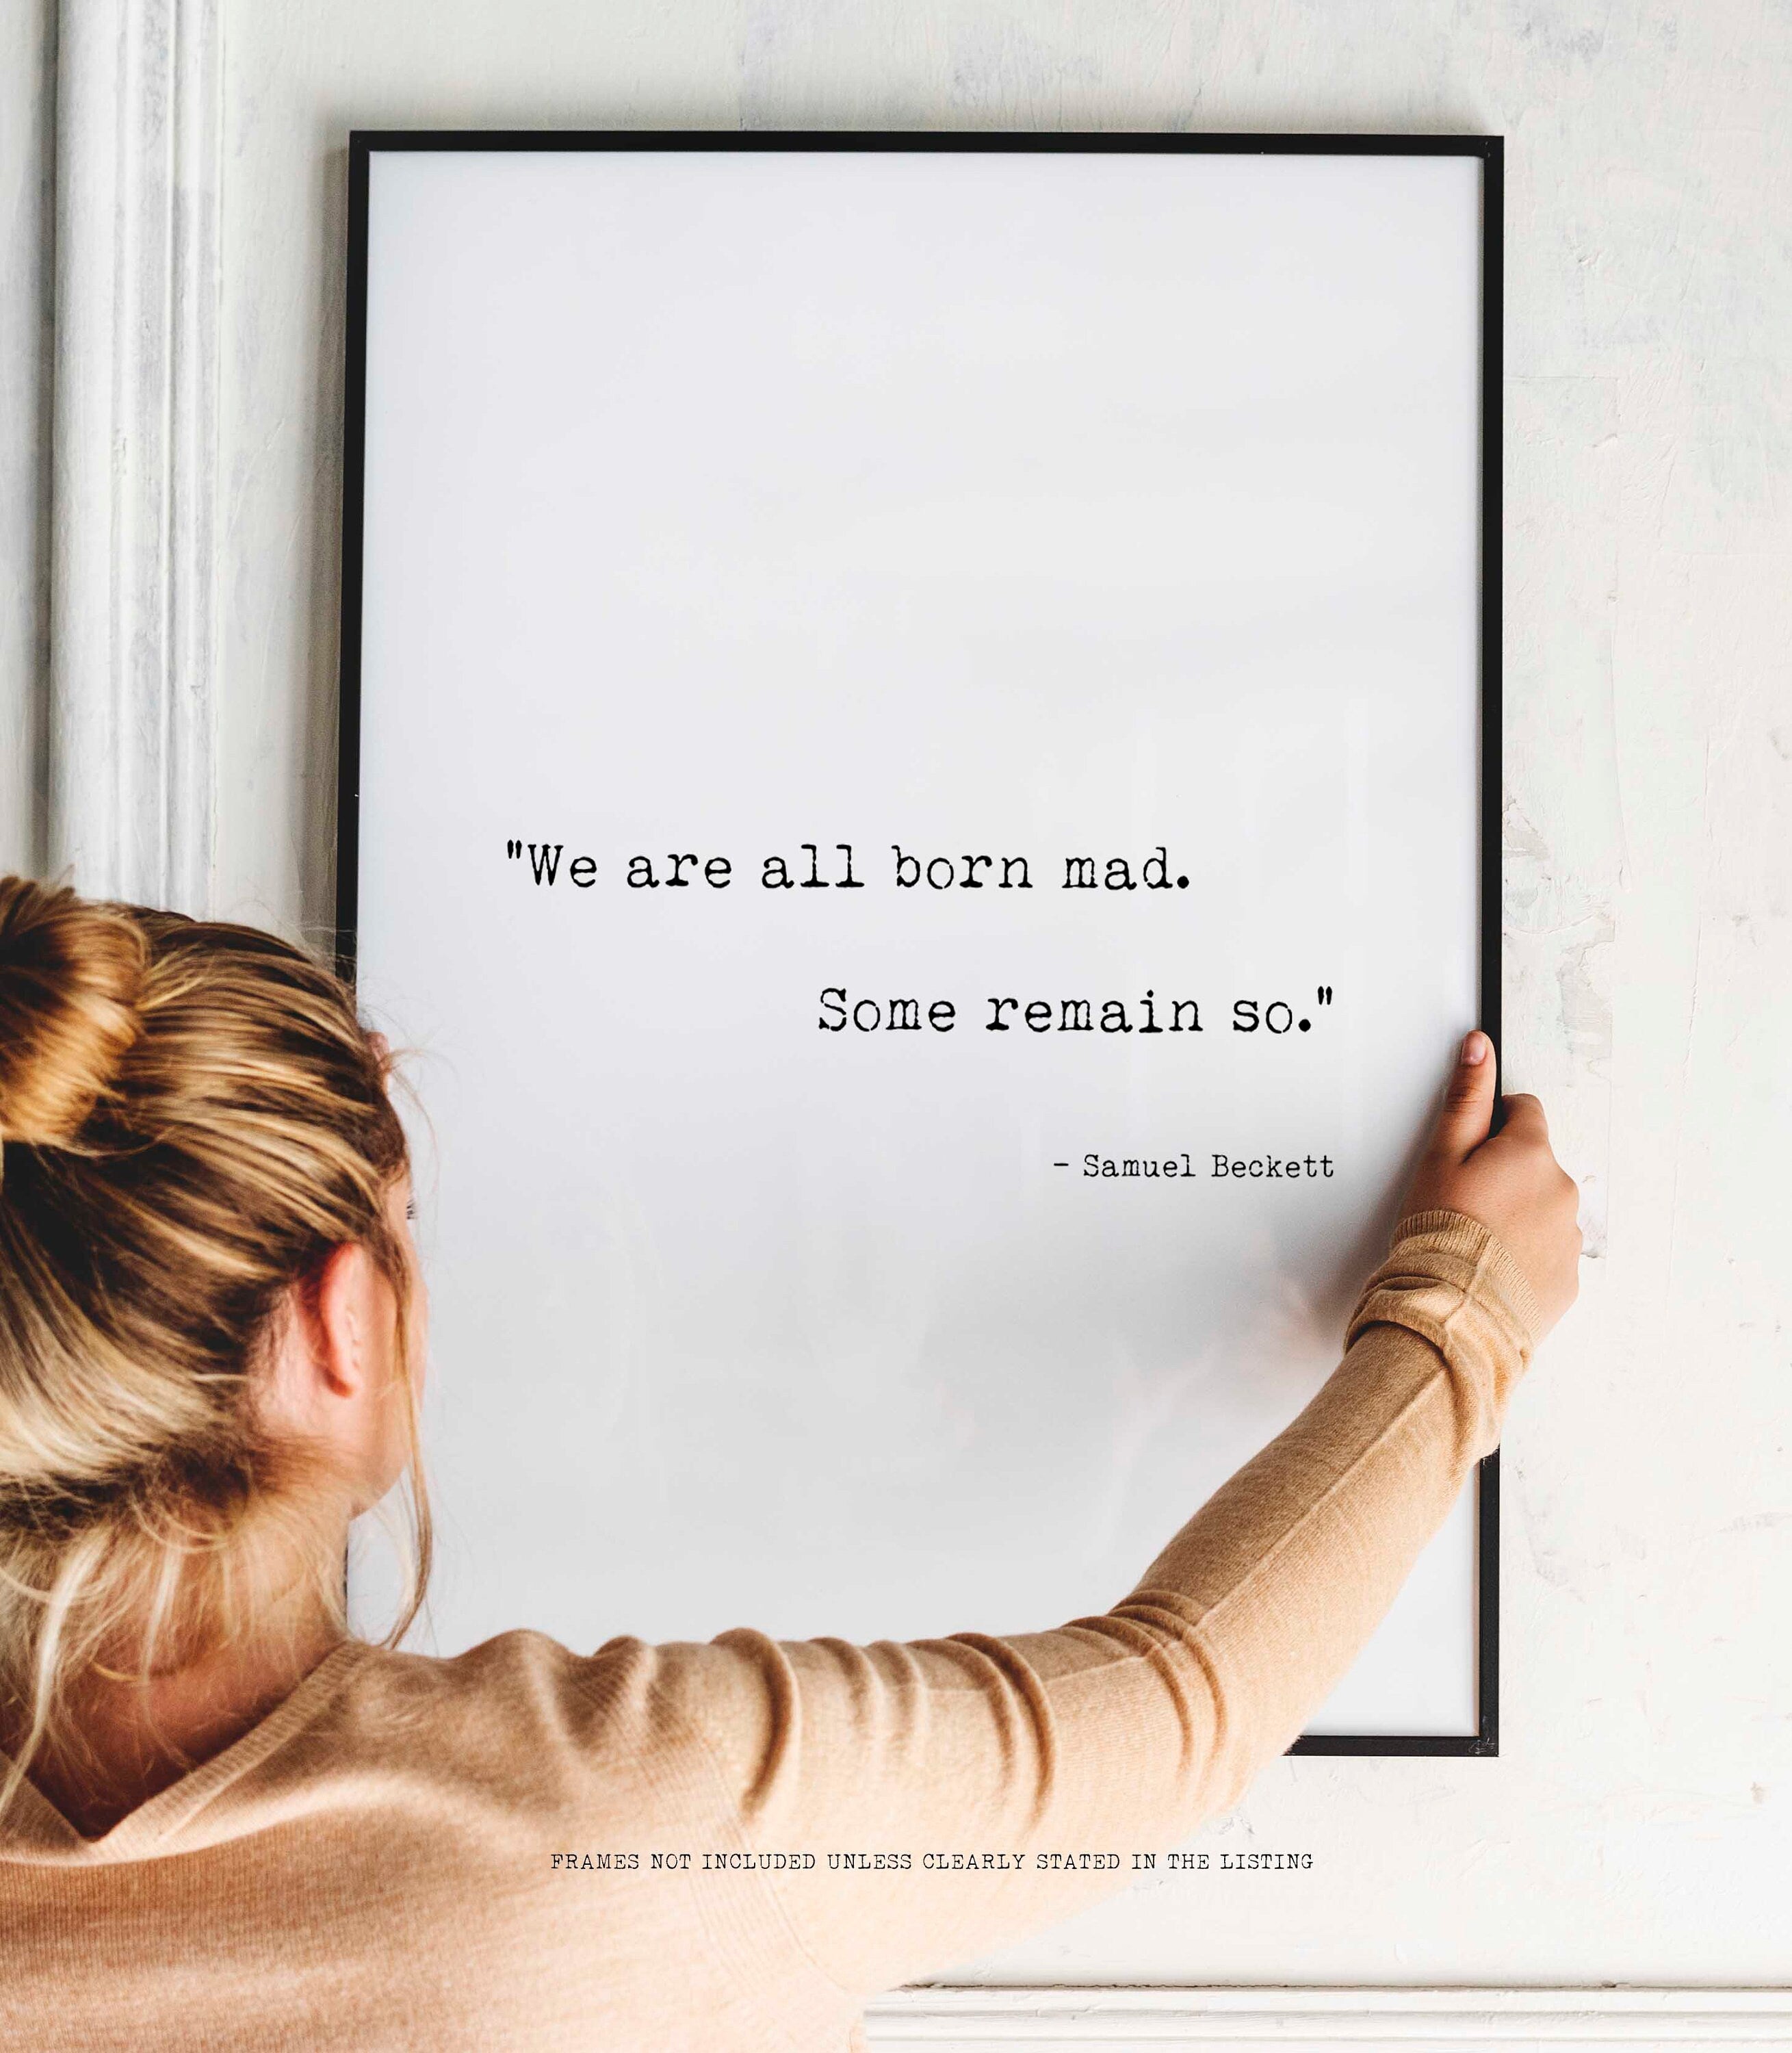 Samuel Beckett Quote Print wall art - We are all born mad. Some remain so print in black & white - Framed and Unframed Options